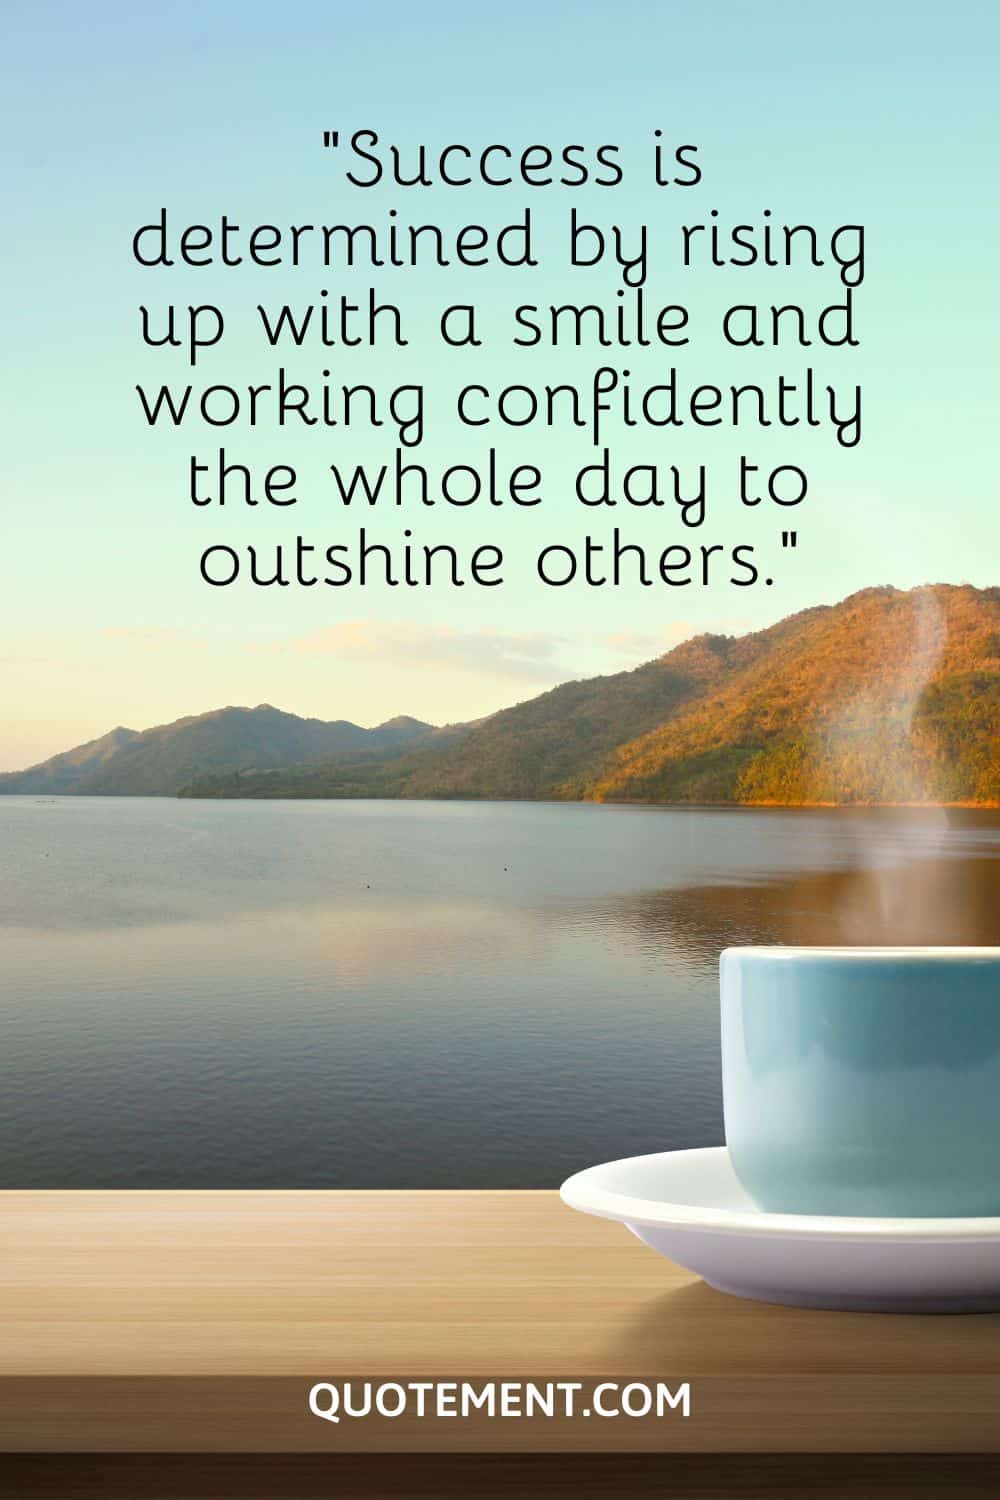 Success is determined by rising up with a smile and working confidently the whole day to outshine others.